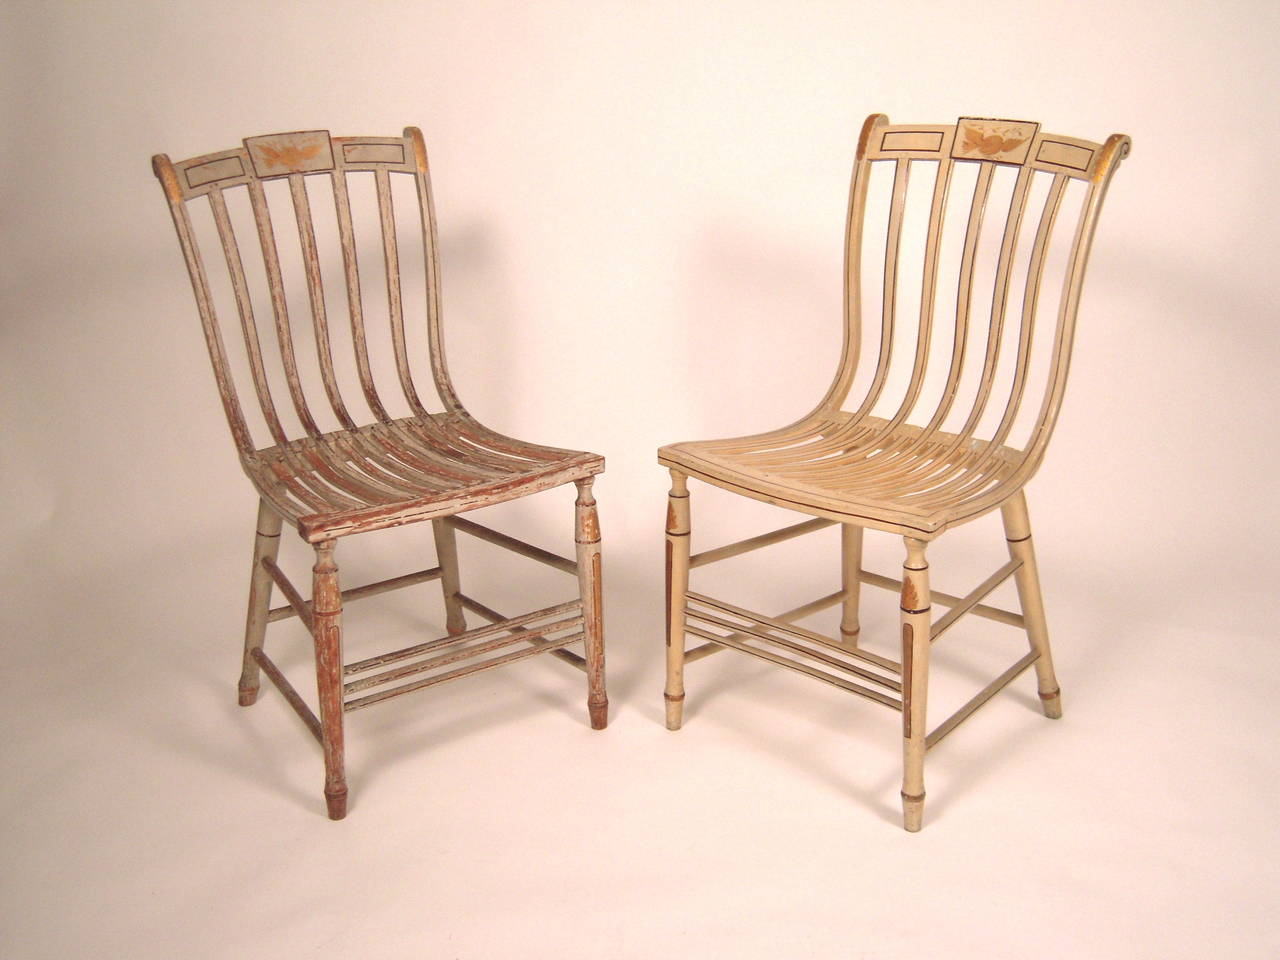 A rare pair of painted ash and hickory painted bentwood chairs by Samuel Gragg (American, 1772-1855), made in Boston, circa 1808, one with distressed early finish, the other with restored and repainted surface, as seen in photographs.

Samuel